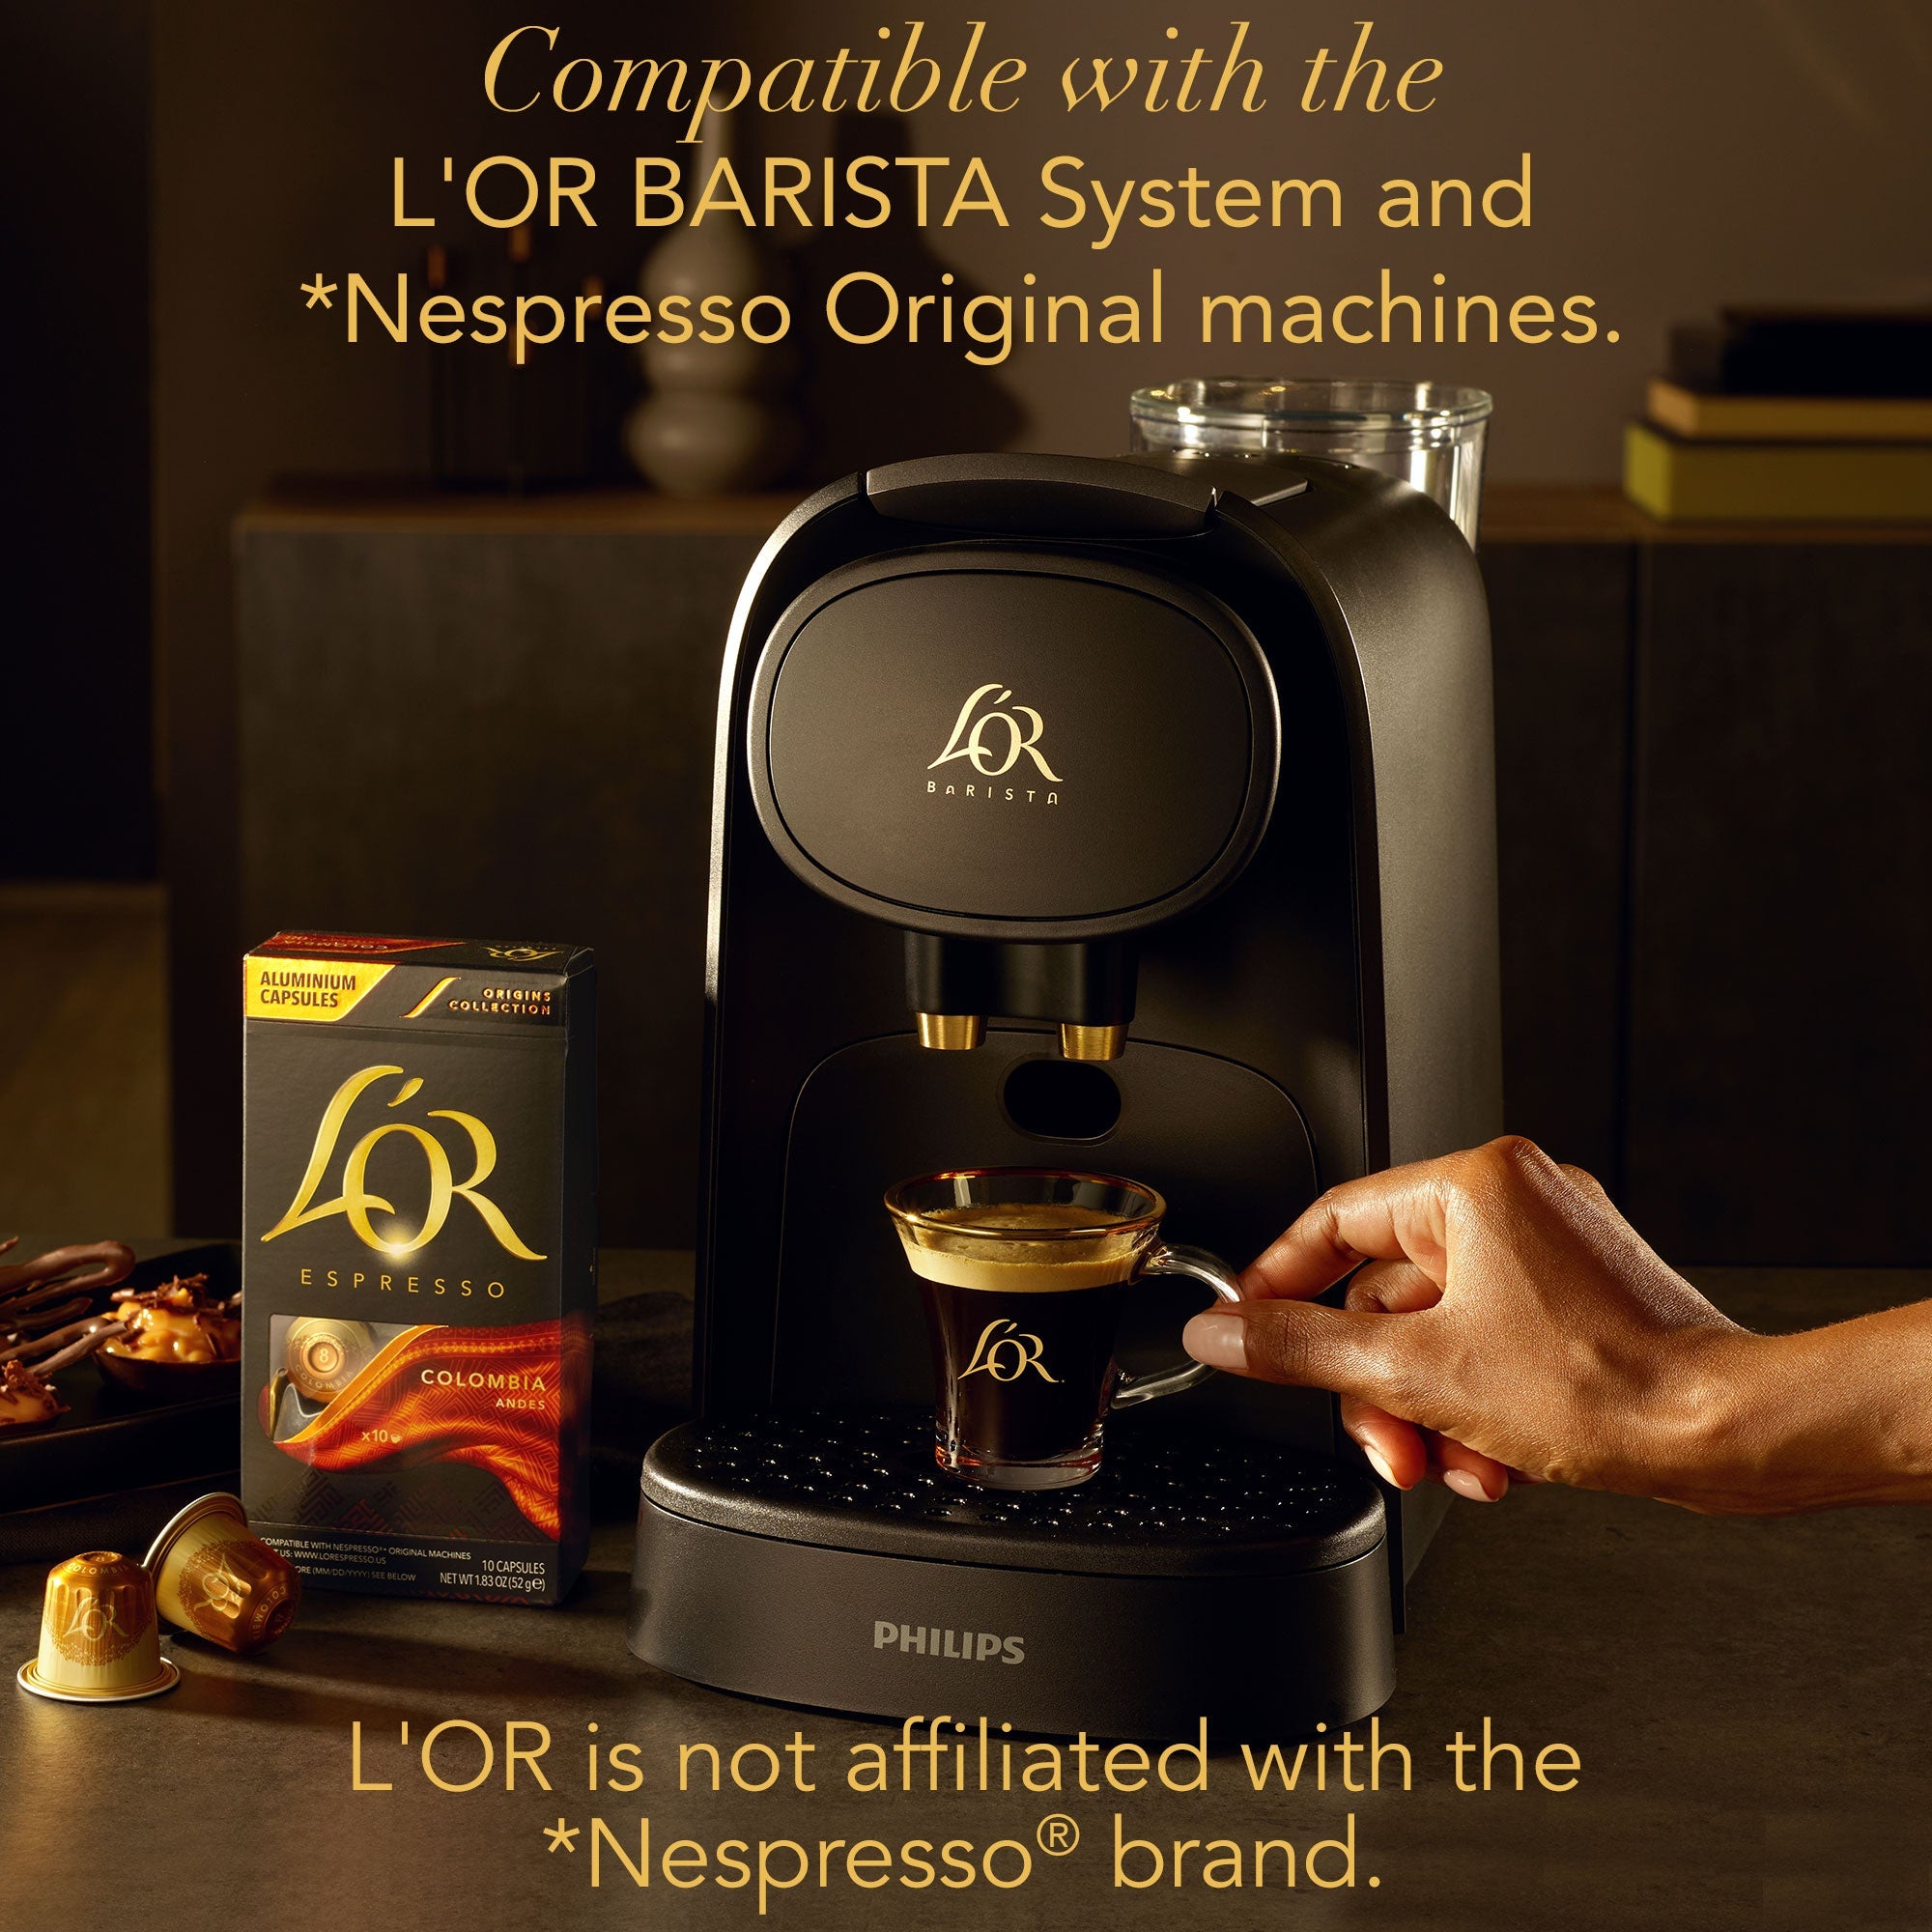 Image of L'OR BARISTA System